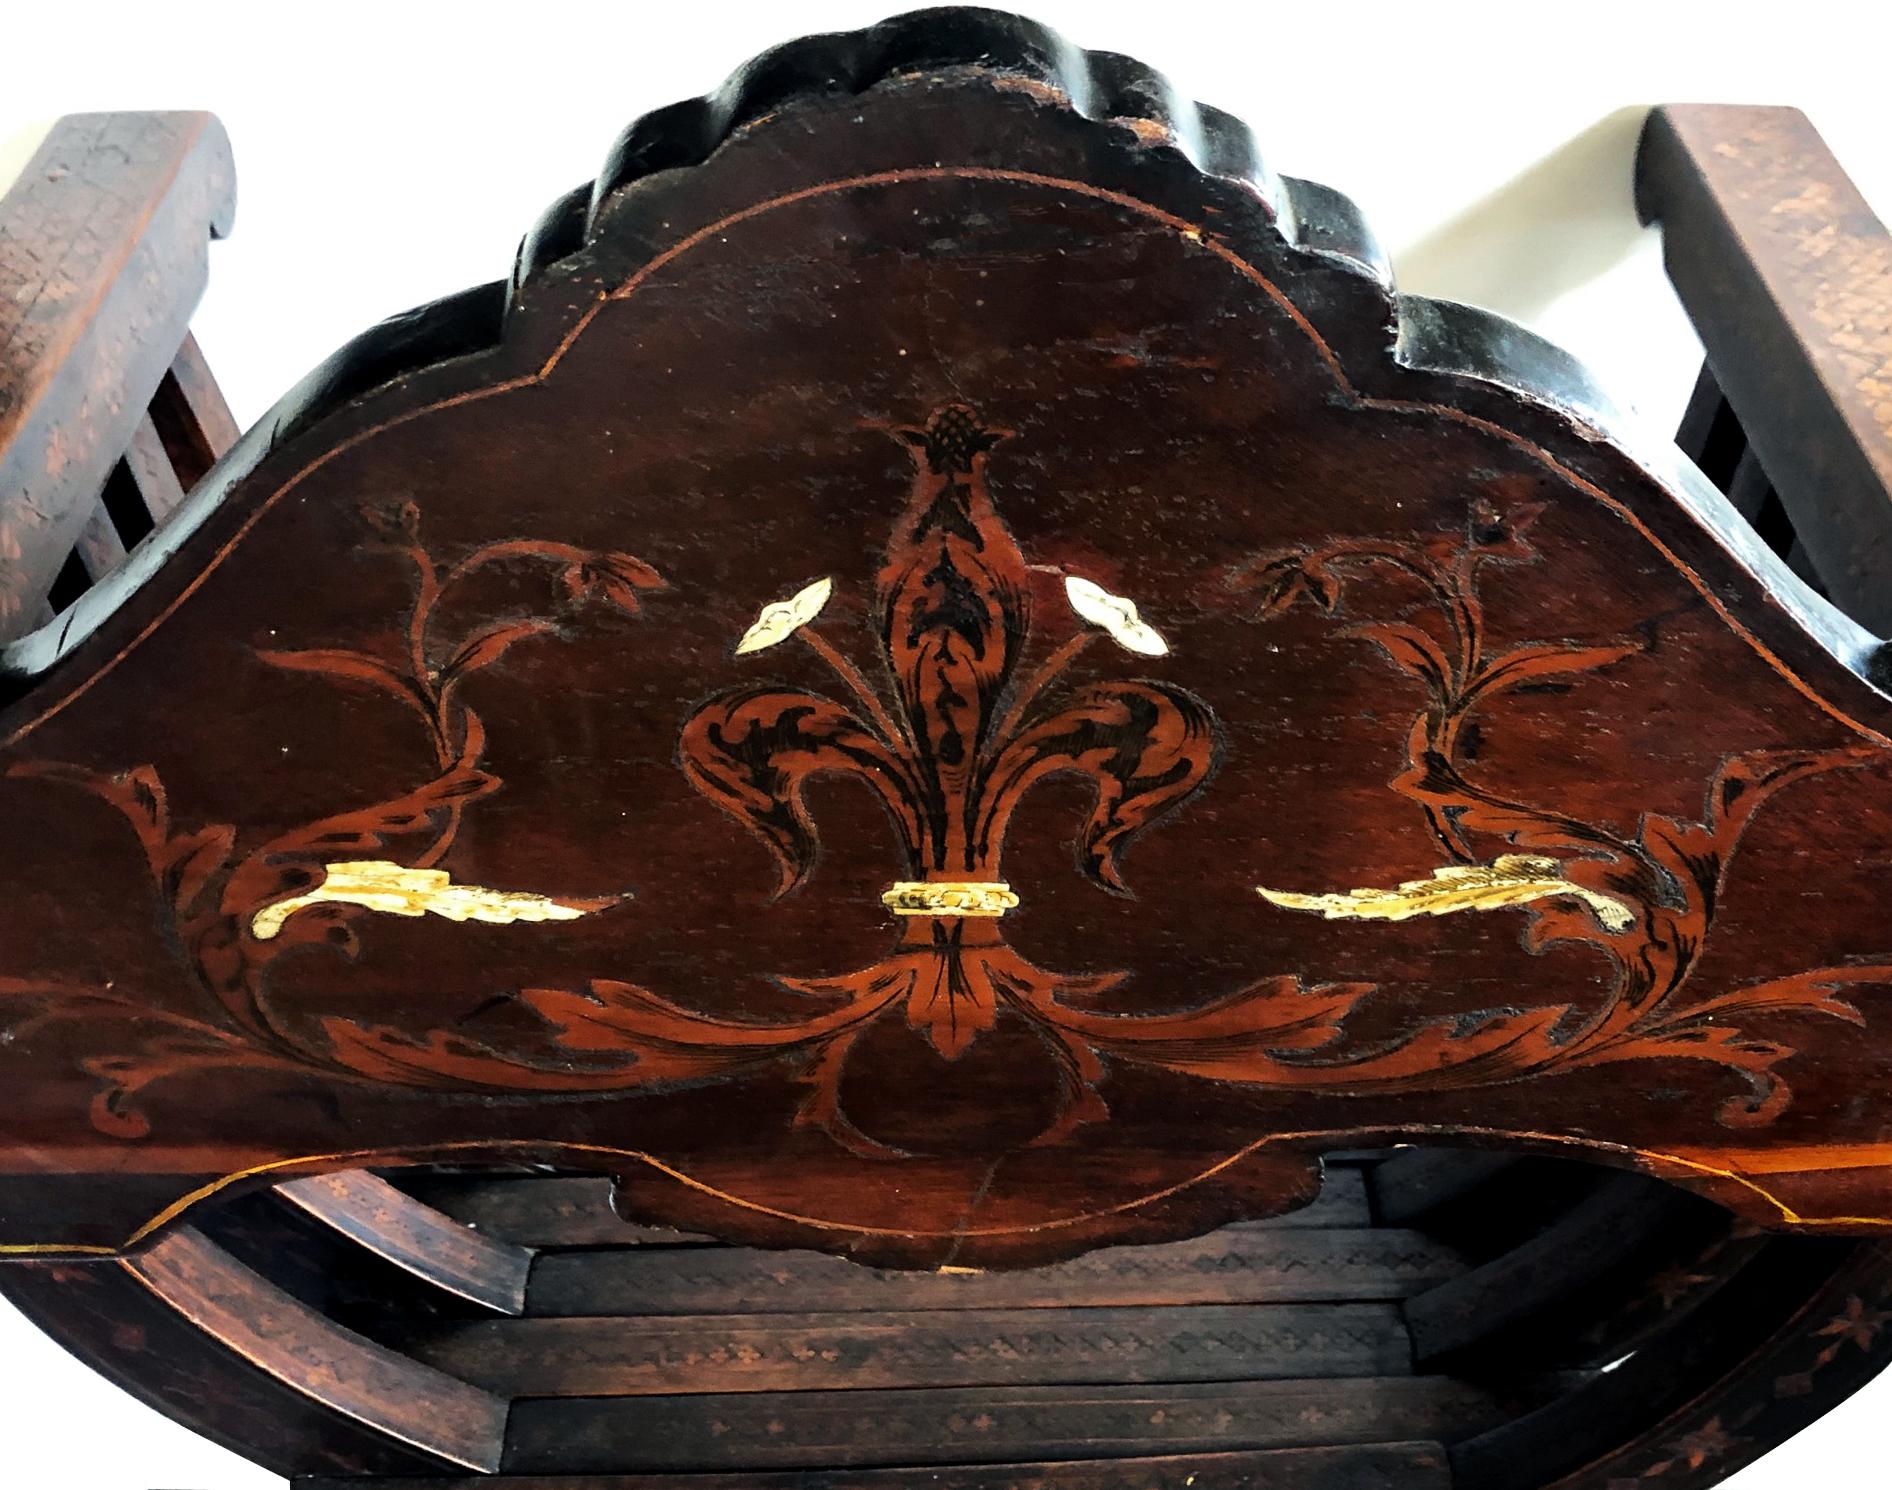 A fine quality pair of Florentine walnut and bone inlaid Savonarola x-form chairs with Medici crest; each stunning chair with shaped back crest rail with inlaid royal heraldry centering the Medici coat of arms; the whole with geometric and marquetry